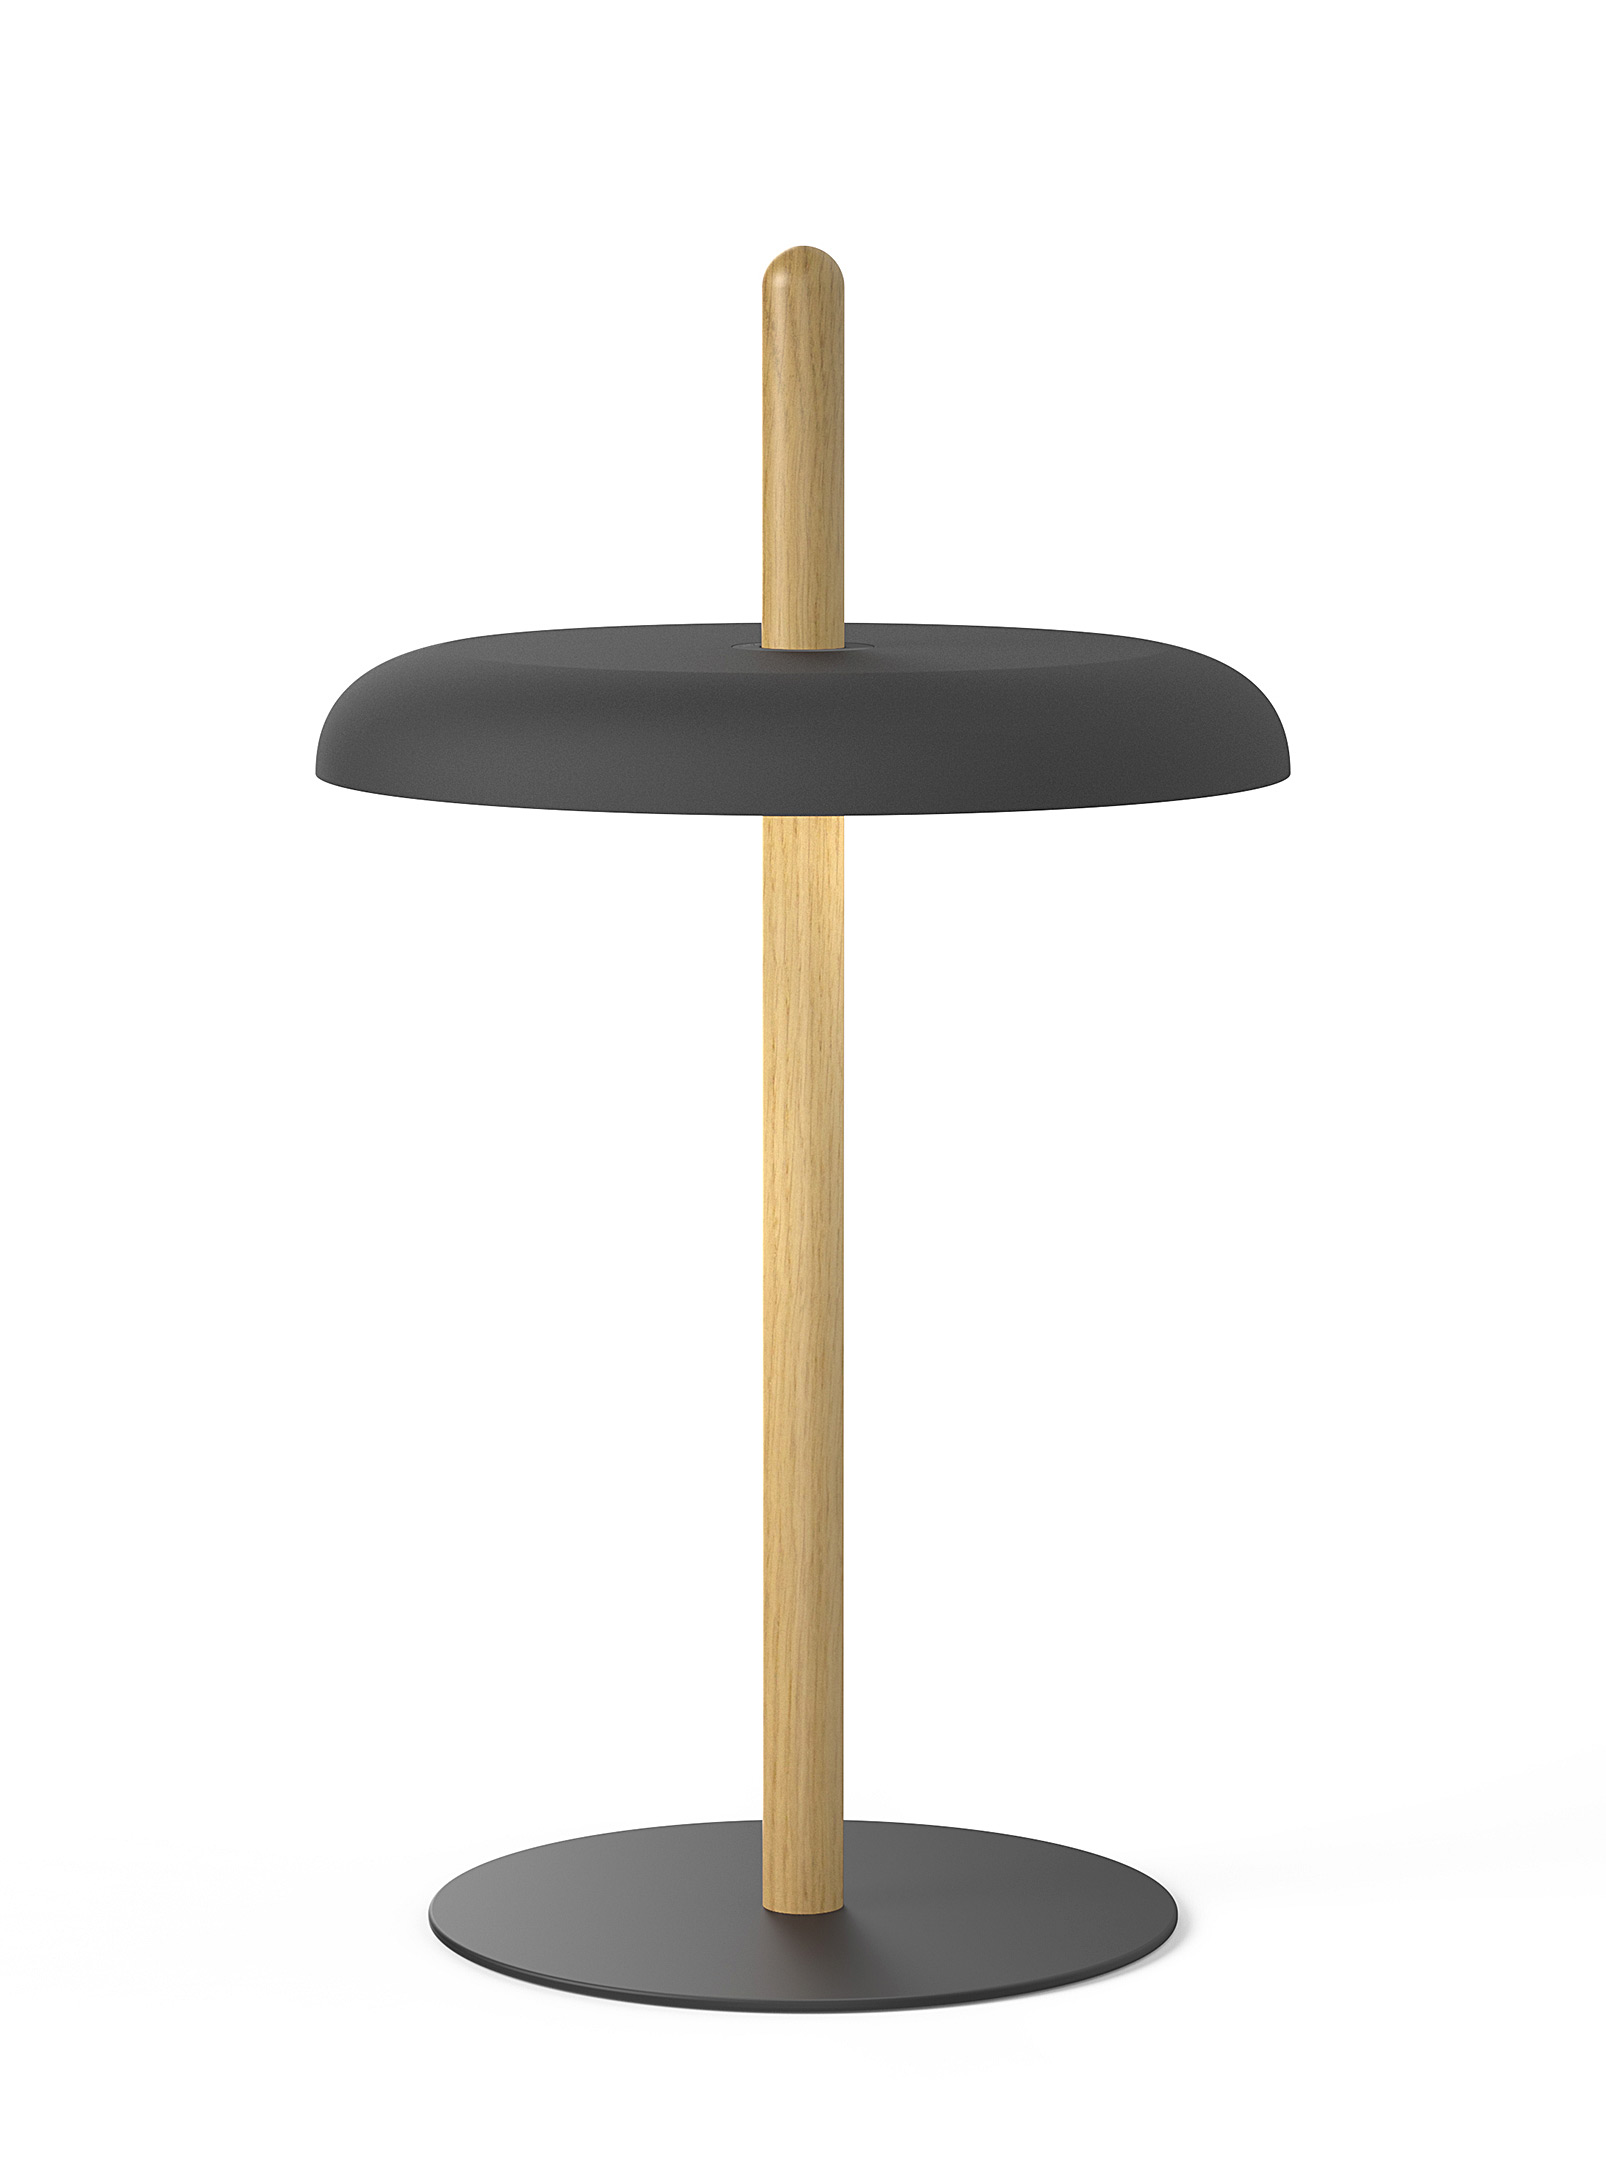 Pablo Designs Nivél Table Lamp With Solid Oak Pole In Black